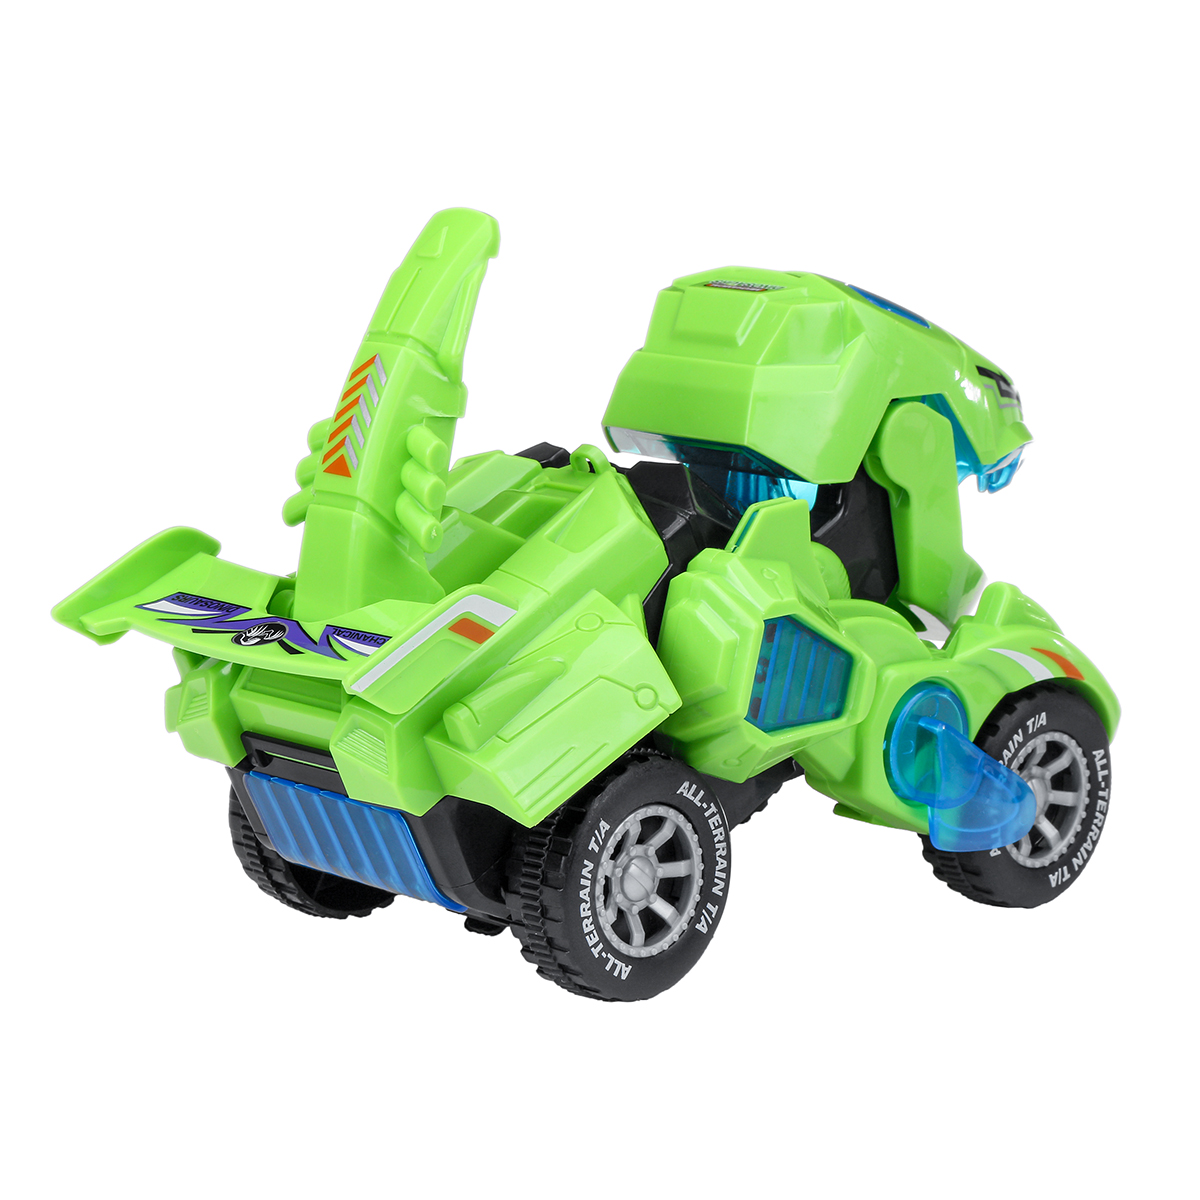 Creative-Dinosaur-Deformation-Toy-Car-Puzzle-Dinosaur-Electric-Toy-Car-Light-and-Music-Electric-Defo-1757309-10